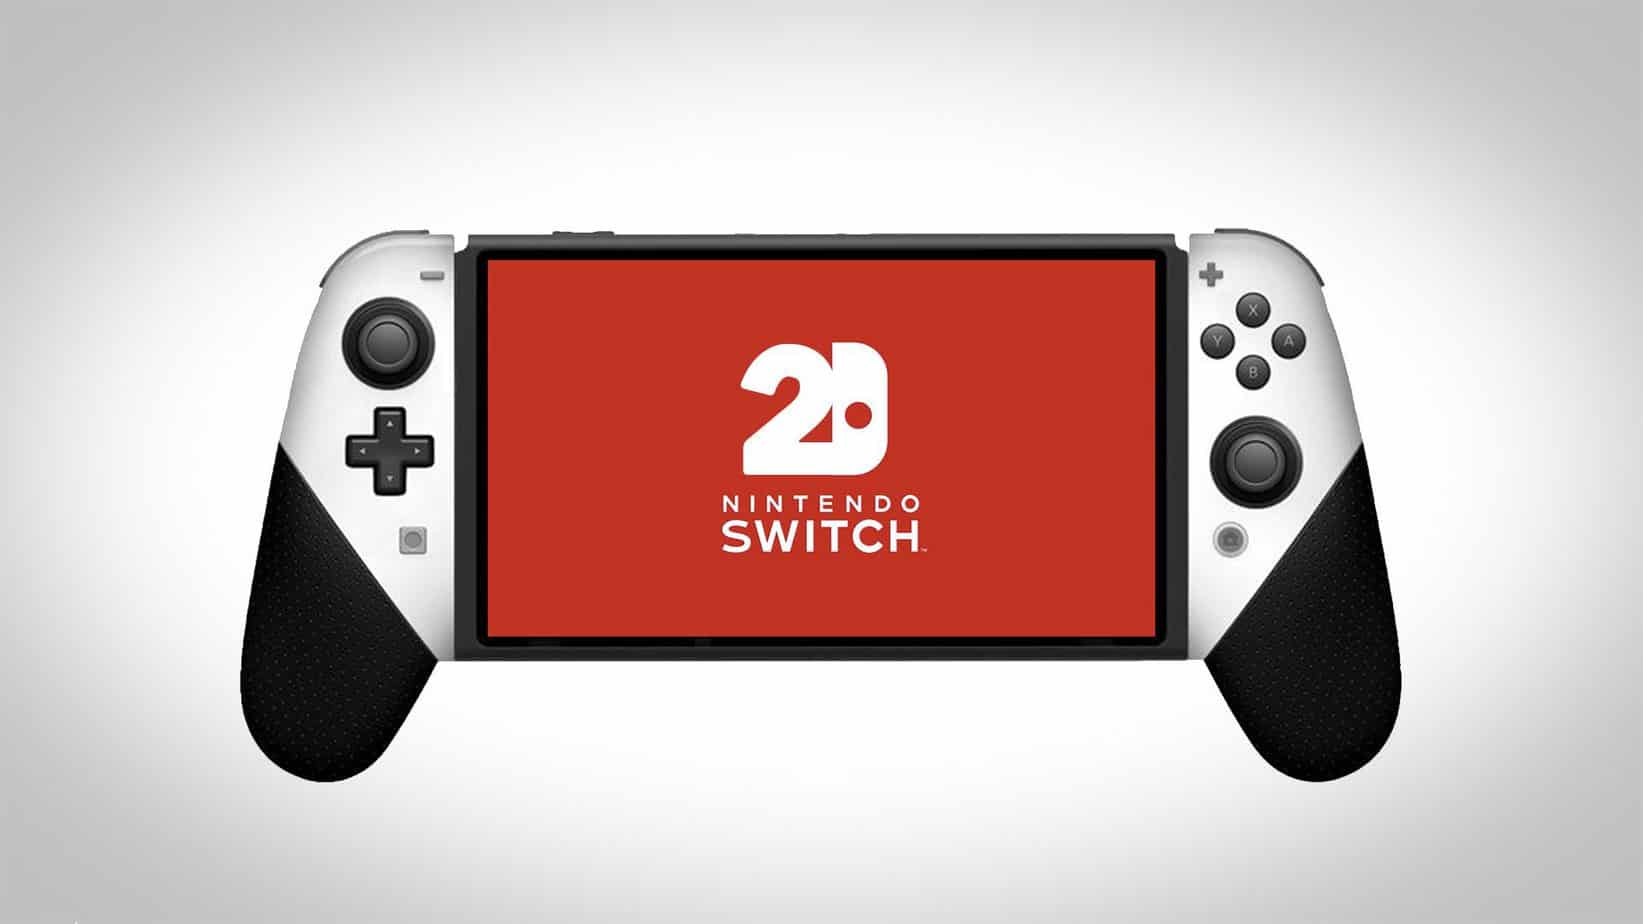 Nintendo Switch Pro Bad Idea -- Better to Focus On the Next System